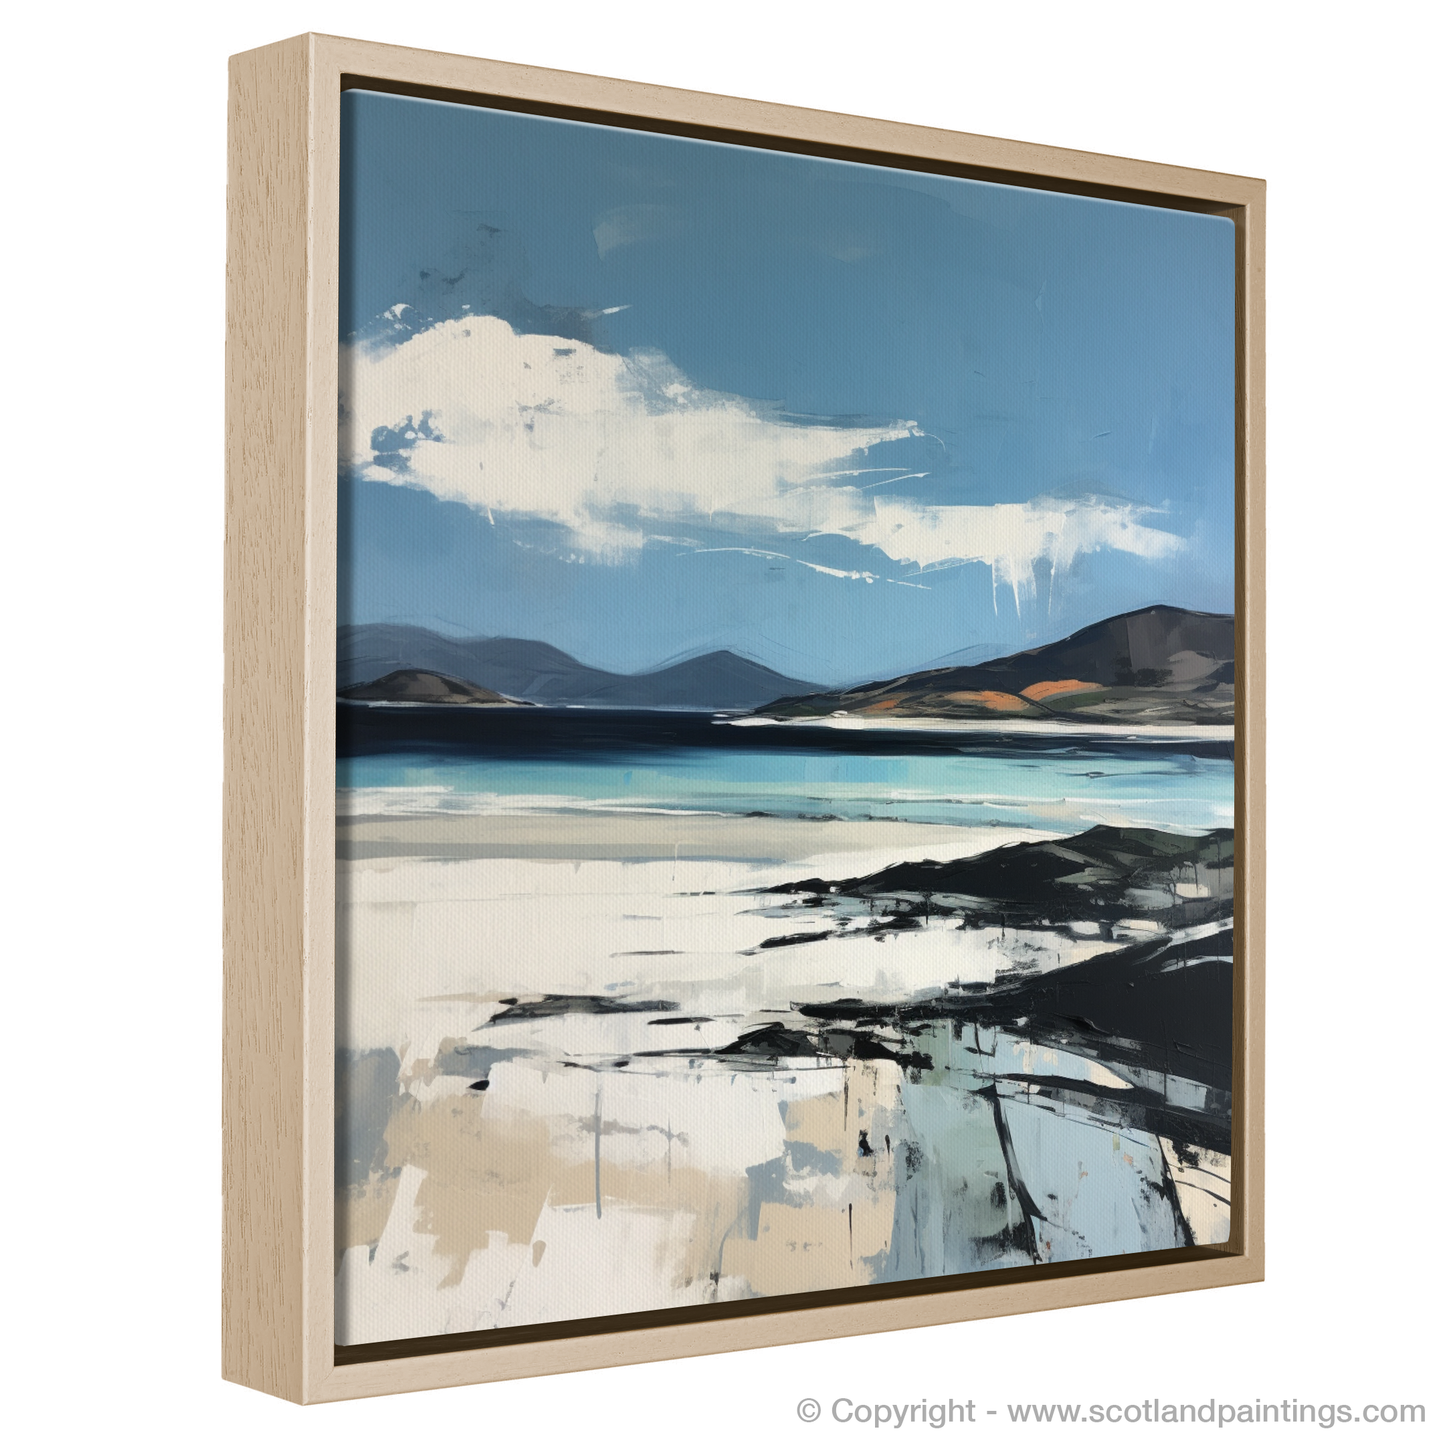 Painting and Art Print of Luskentyre Sands on the Isle of Harris entitled "Luskentyre Sands: An Expressionist Ode to Scotland's Coastal Majesty".